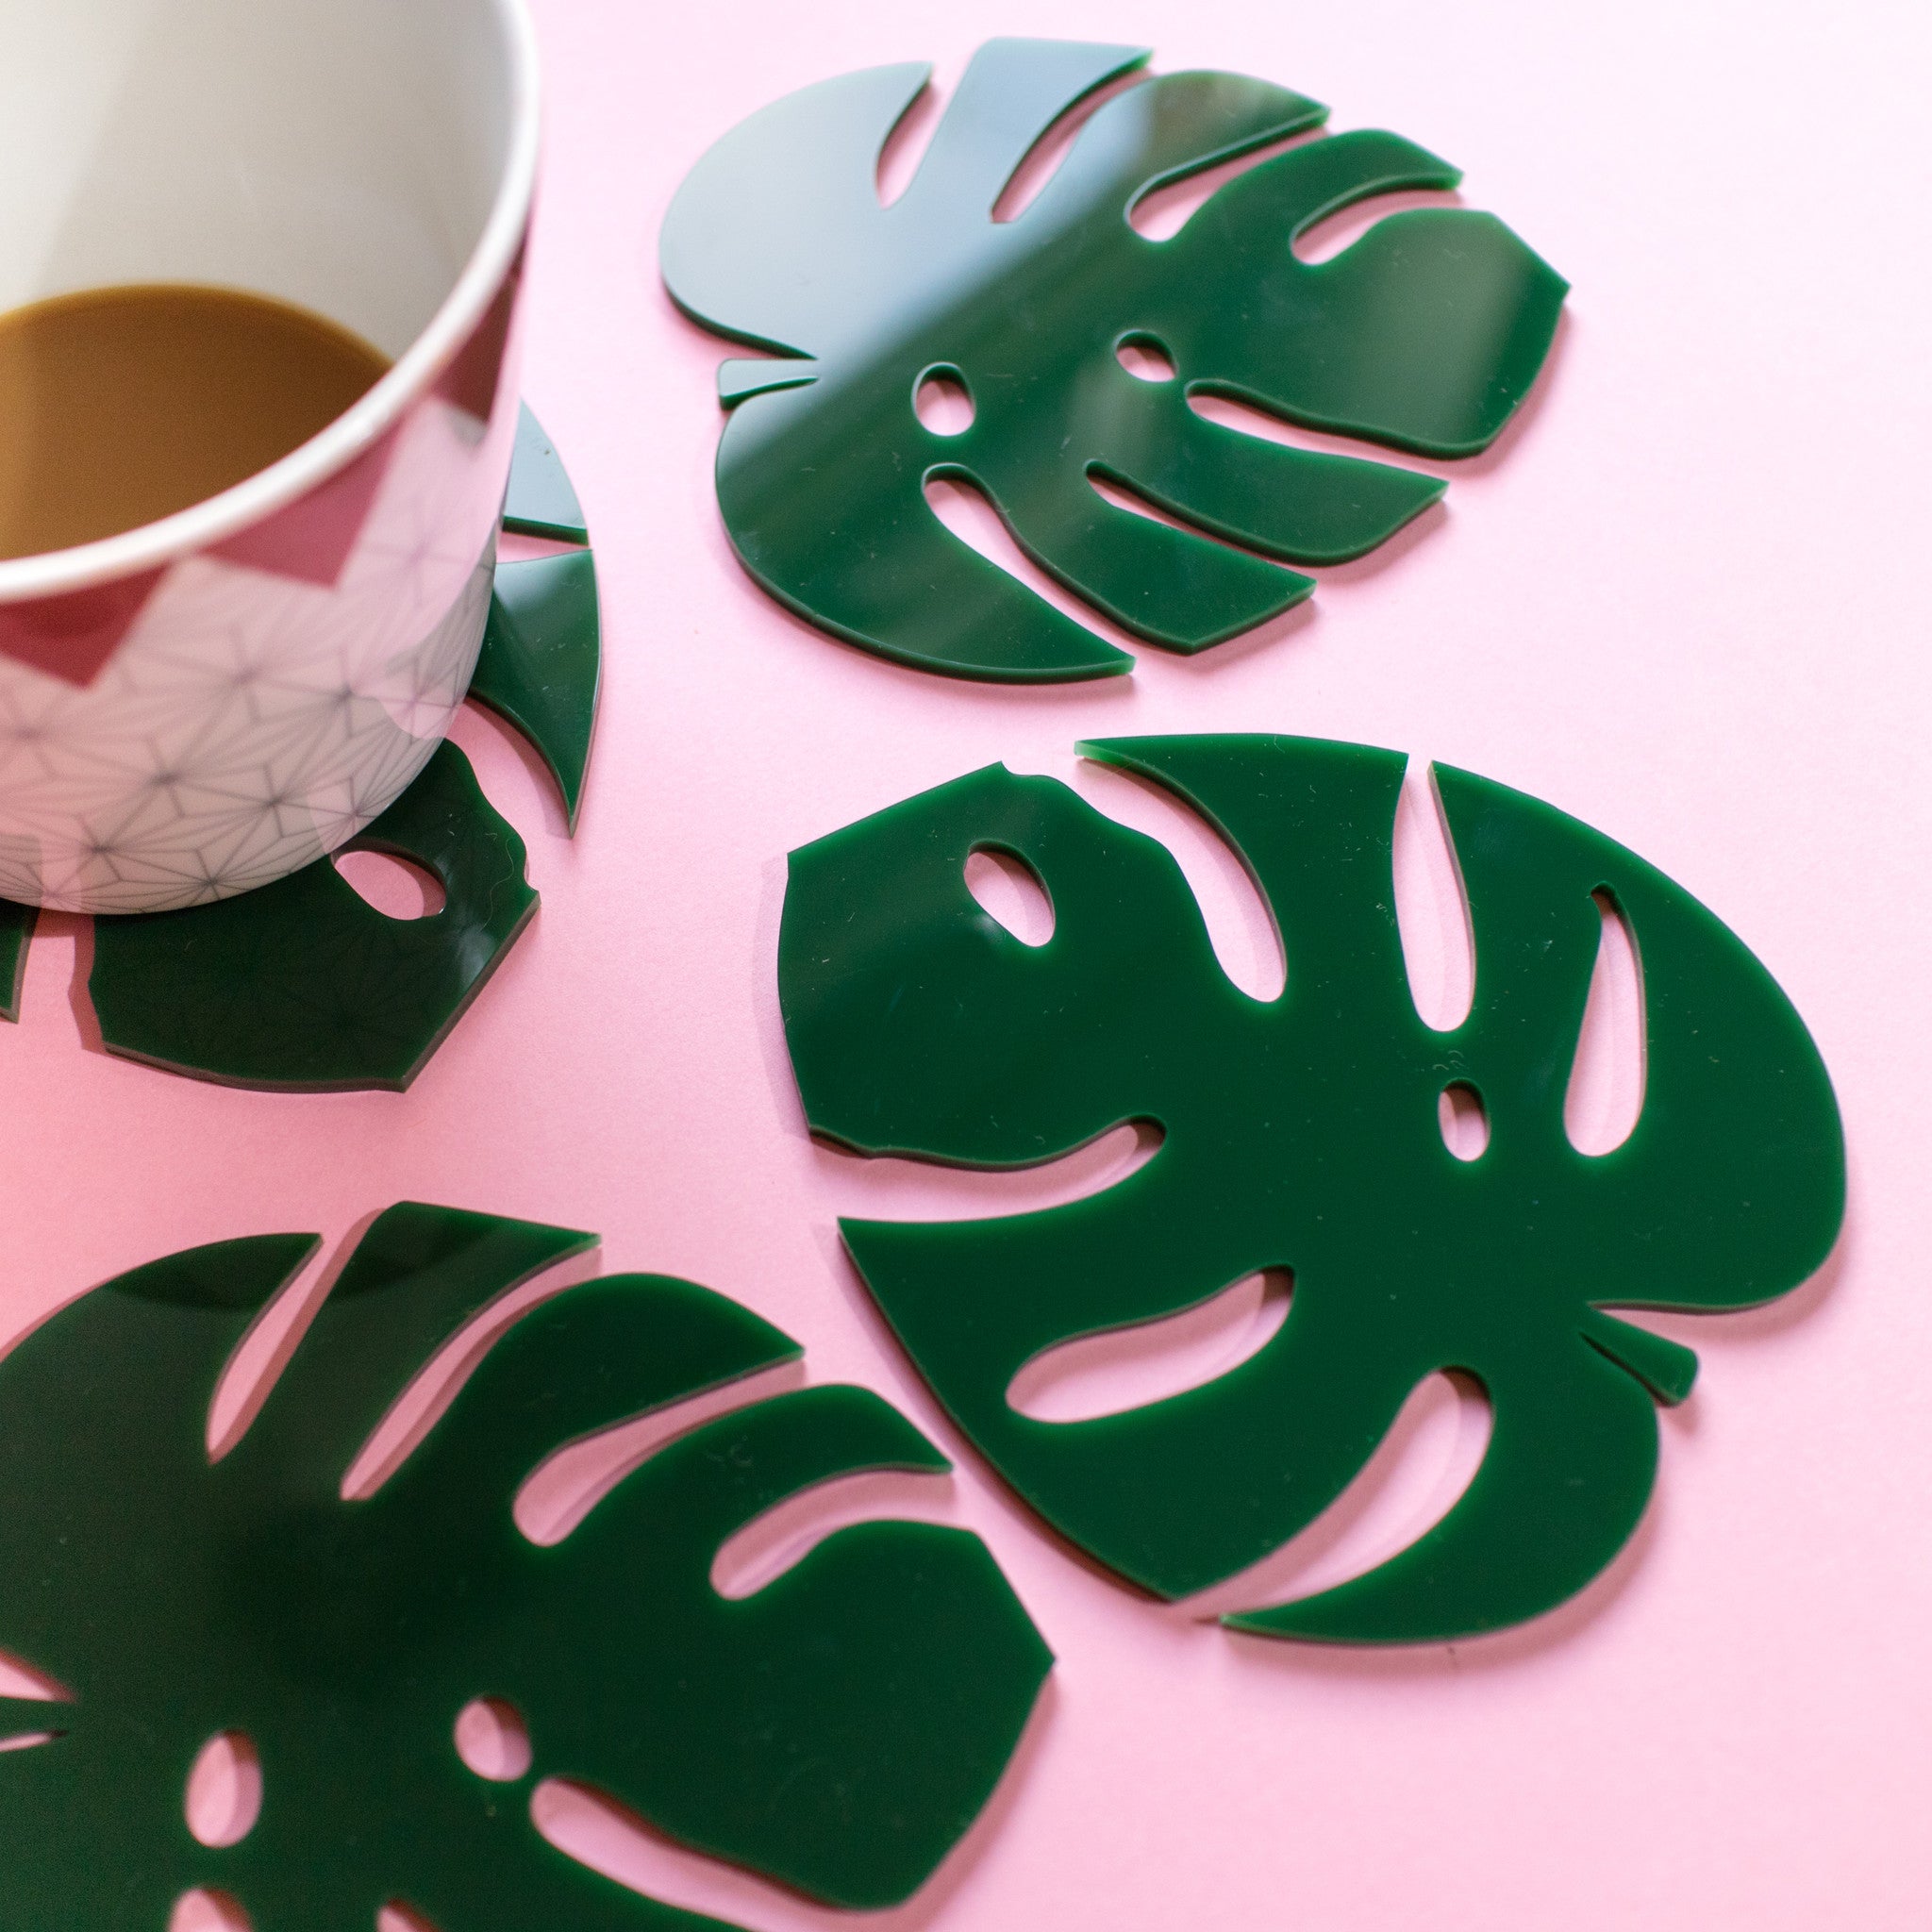 Cheese Plant Leaf Coasters - Finest Imaginary